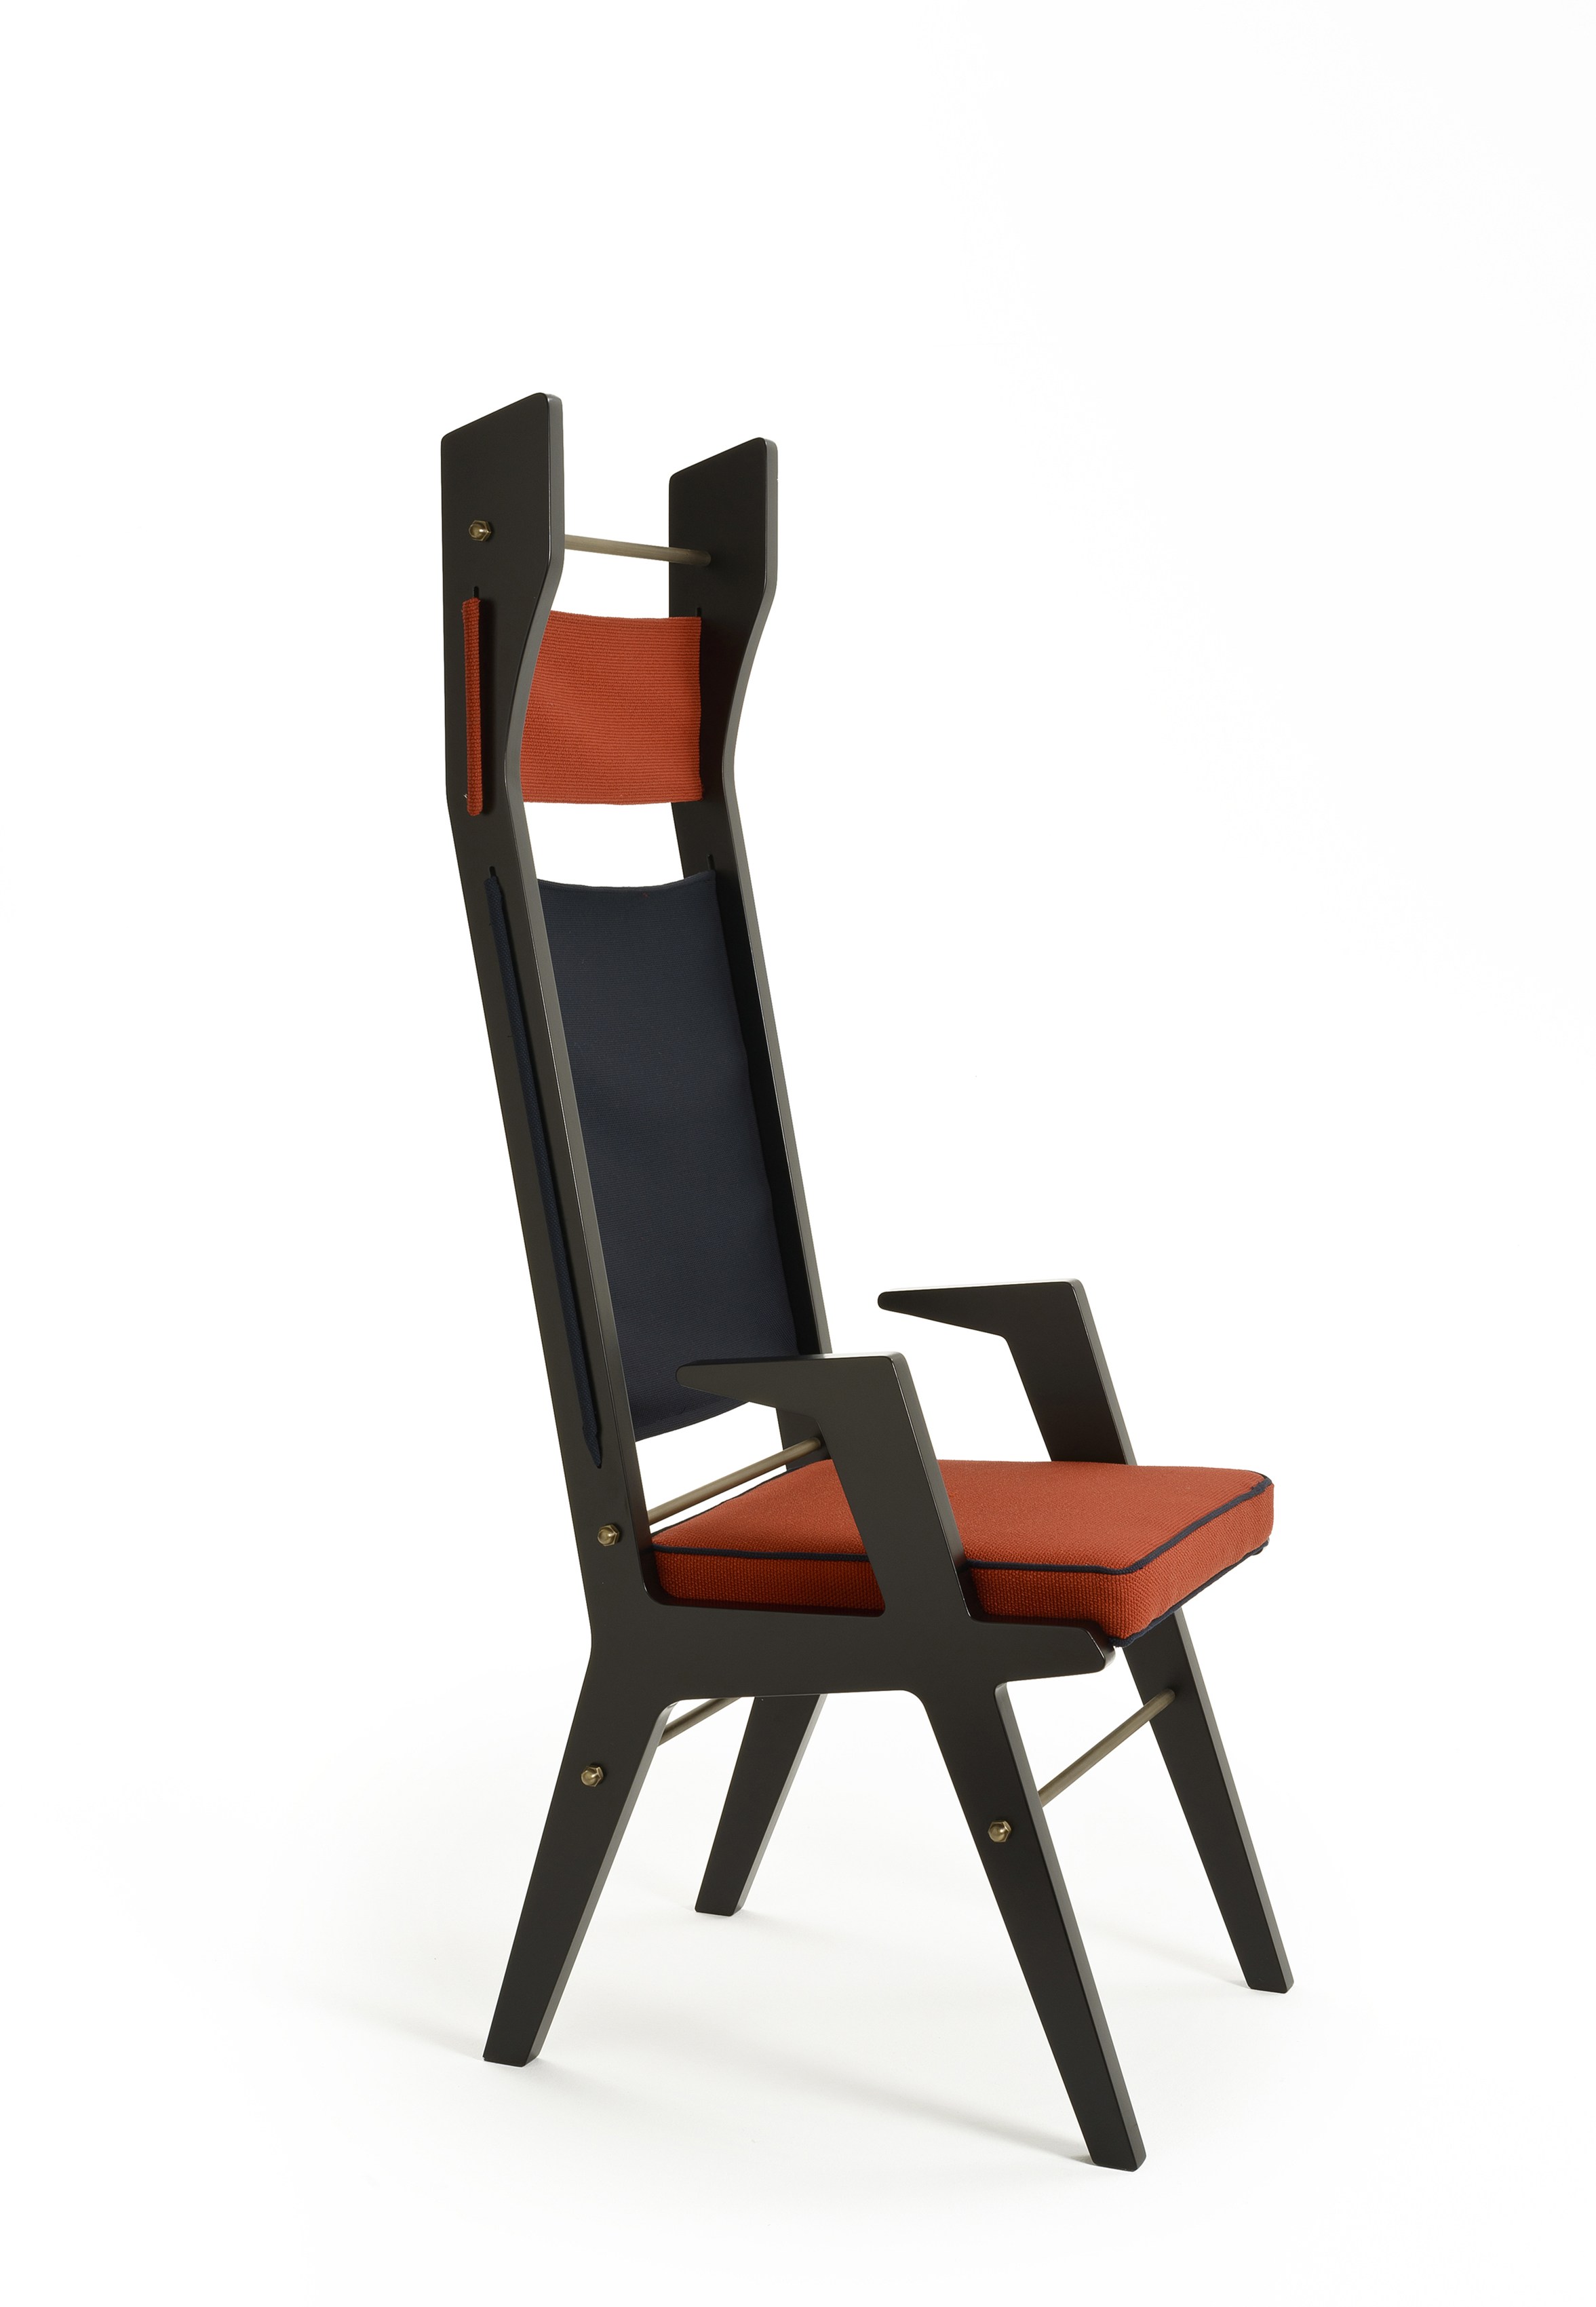 Colette Armchair by Lorenza Bozzoli for Colé